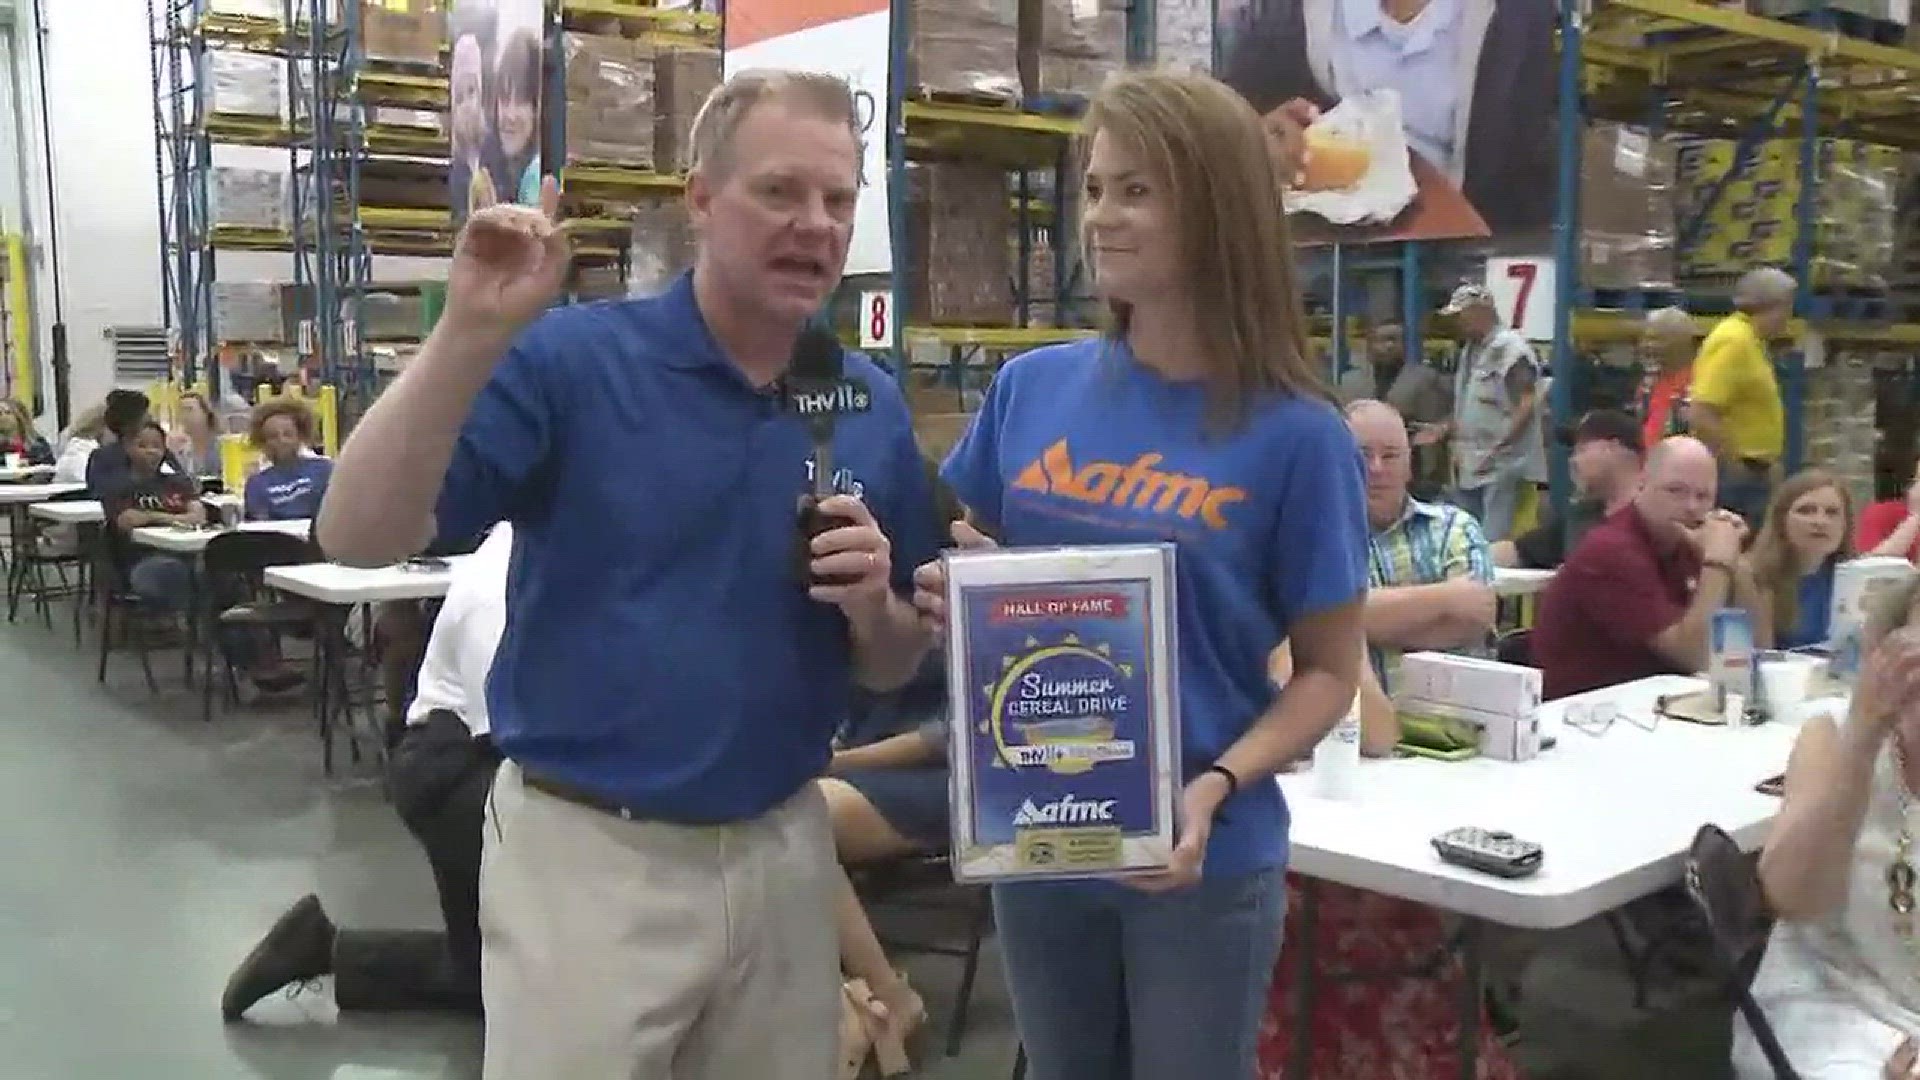 THV11's Tom Brannon was live at the Arkansas Foodbank to wrap up the 2017 THV11 Summer Cereal Drive